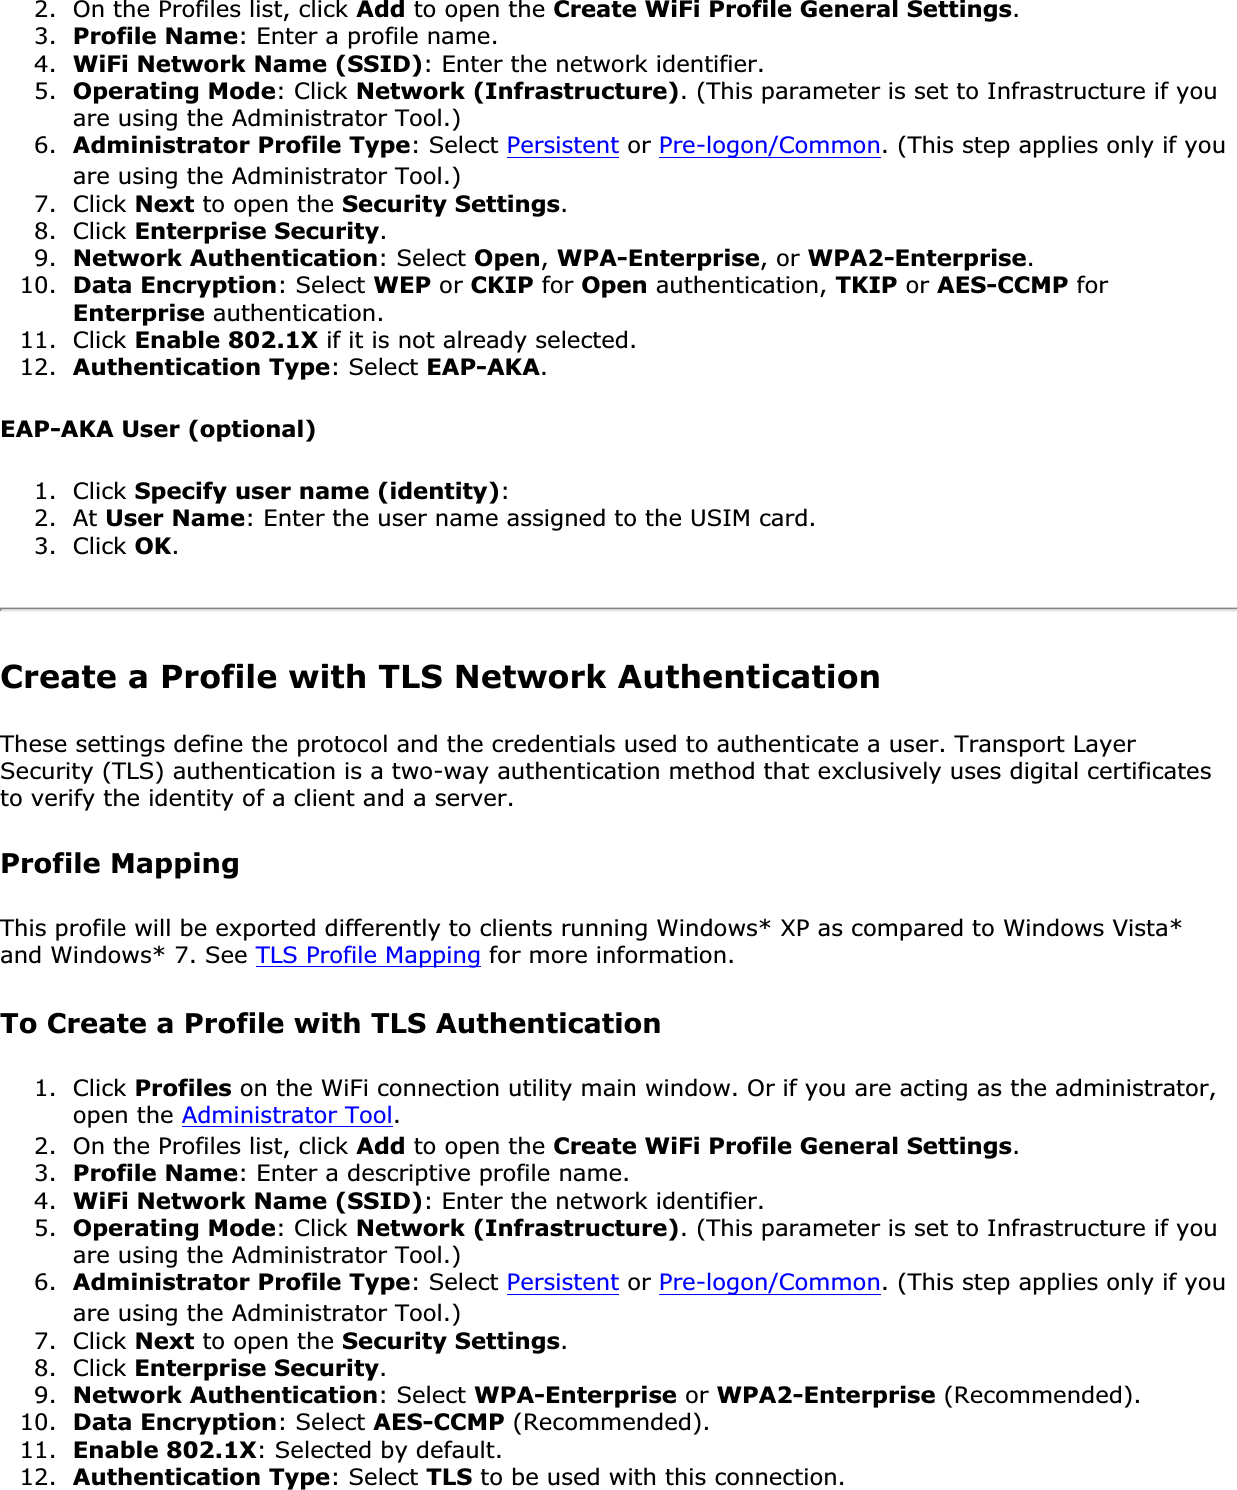 2. On the Profiles list, click Add to open the Create WiFi Profile General Settings.3. Profile Name: Enter a profile name.4. WiFi Network Name (SSID): Enter the network identifier.5. Operating Mode: Click Network (Infrastructure). (This parameter is set to Infrastructure if you are using the Administrator Tool.)6. Administrator Profile Type: Select Persistent or Pre-logon/Common. (This step applies only if you are using the Administrator Tool.)7. Click Next to open the Security Settings.8. Click Enterprise Security.9. Network Authentication: Select Open,WPA-Enterprise, or WPA2-Enterprise.10. Data Encryption: Select WEP or CKIP for Open authentication, TKIP or AES-CCMP for Enterprise authentication.11. Click Enable 802.1X if it is not already selected.12. Authentication Type: Select EAP-AKA.EAP-AKA User (optional) 1. Click Specify user name (identity):2. At User Name: Enter the user name assigned to the USIM card.3. Click OK.Create a Profile with TLS Network Authentication These settings define the protocol and the credentials used to authenticate a user. Transport Layer Security (TLS) authentication is a two-way authentication method that exclusively uses digital certificates to verify the identity of a client and a server.Profile MappingThis profile will be exported differently to clients running Windows* XP as compared to Windows Vista* and Windows* 7. See TLS Profile Mapping for more information. To Create a Profile with TLS Authentication1. Click Profiles on the WiFi connection utility main window. Or if you are acting as the administrator, open the Administrator Tool.2. On the Profiles list, click Add to open the Create WiFi Profile General Settings.3. Profile Name: Enter a descriptive profile name.4. WiFi Network Name (SSID): Enter the network identifier.5. Operating Mode: Click Network (Infrastructure). (This parameter is set to Infrastructure if you are using the Administrator Tool.)6. Administrator Profile Type: Select Persistent or Pre-logon/Common. (This step applies only if you are using the Administrator Tool.)7. Click Next to open the Security Settings.8. Click Enterprise Security.9. Network Authentication: Select WPA-Enterprise or WPA2-Enterprise (Recommended).10. Data Encryption: Select AES-CCMP (Recommended).11. Enable 802.1X: Selected by default.12. Authentication Type: Select TLS to be used with this connection.